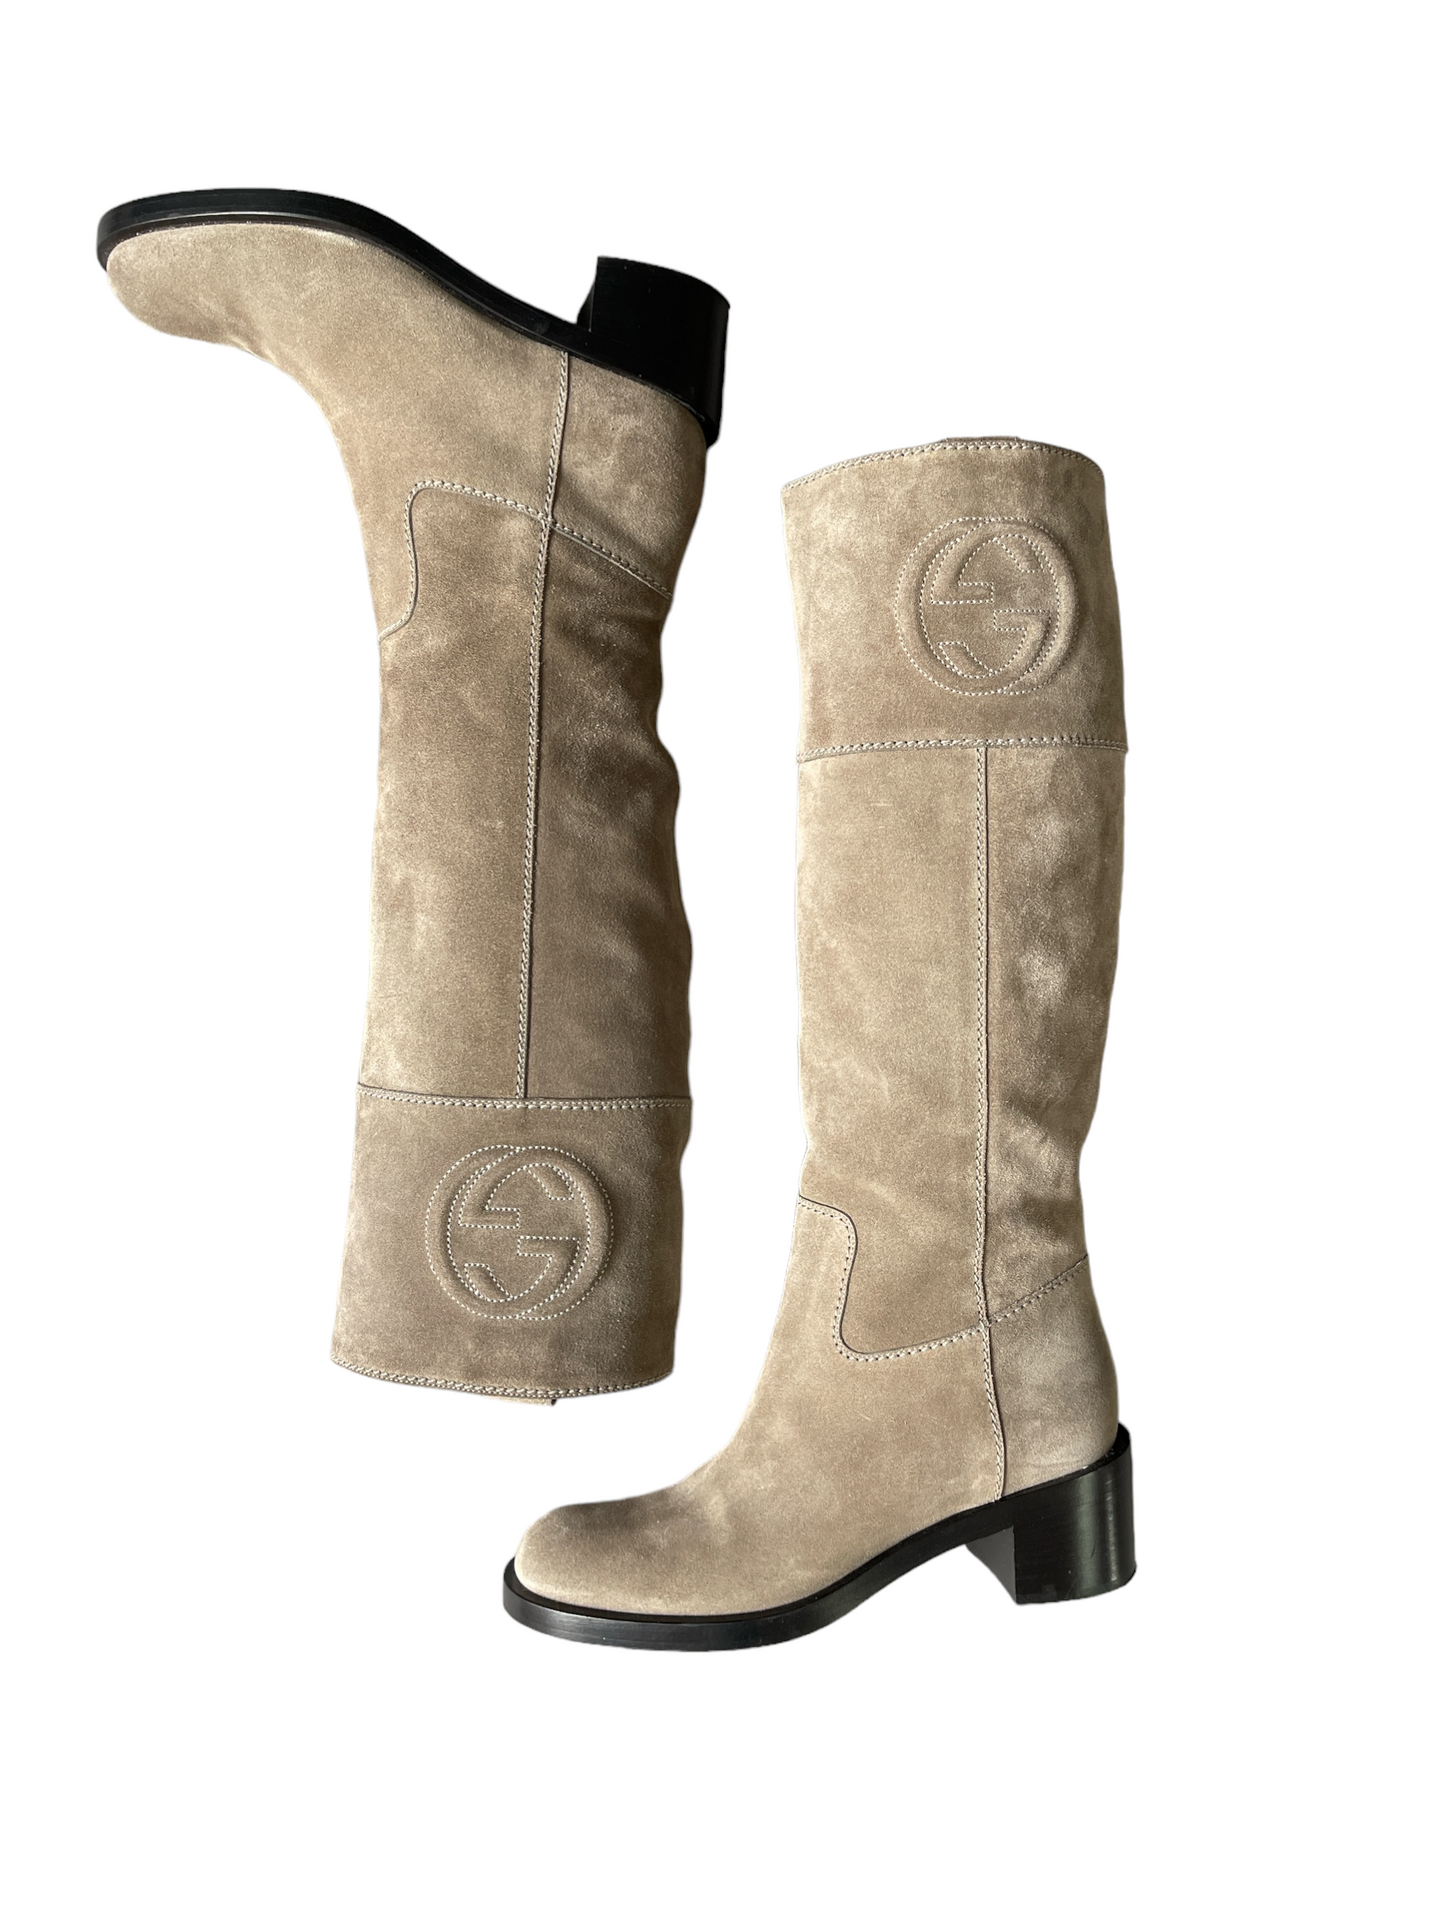 Gucci Nude Brown Knee High GG Suede Boots - Size 36 (New)